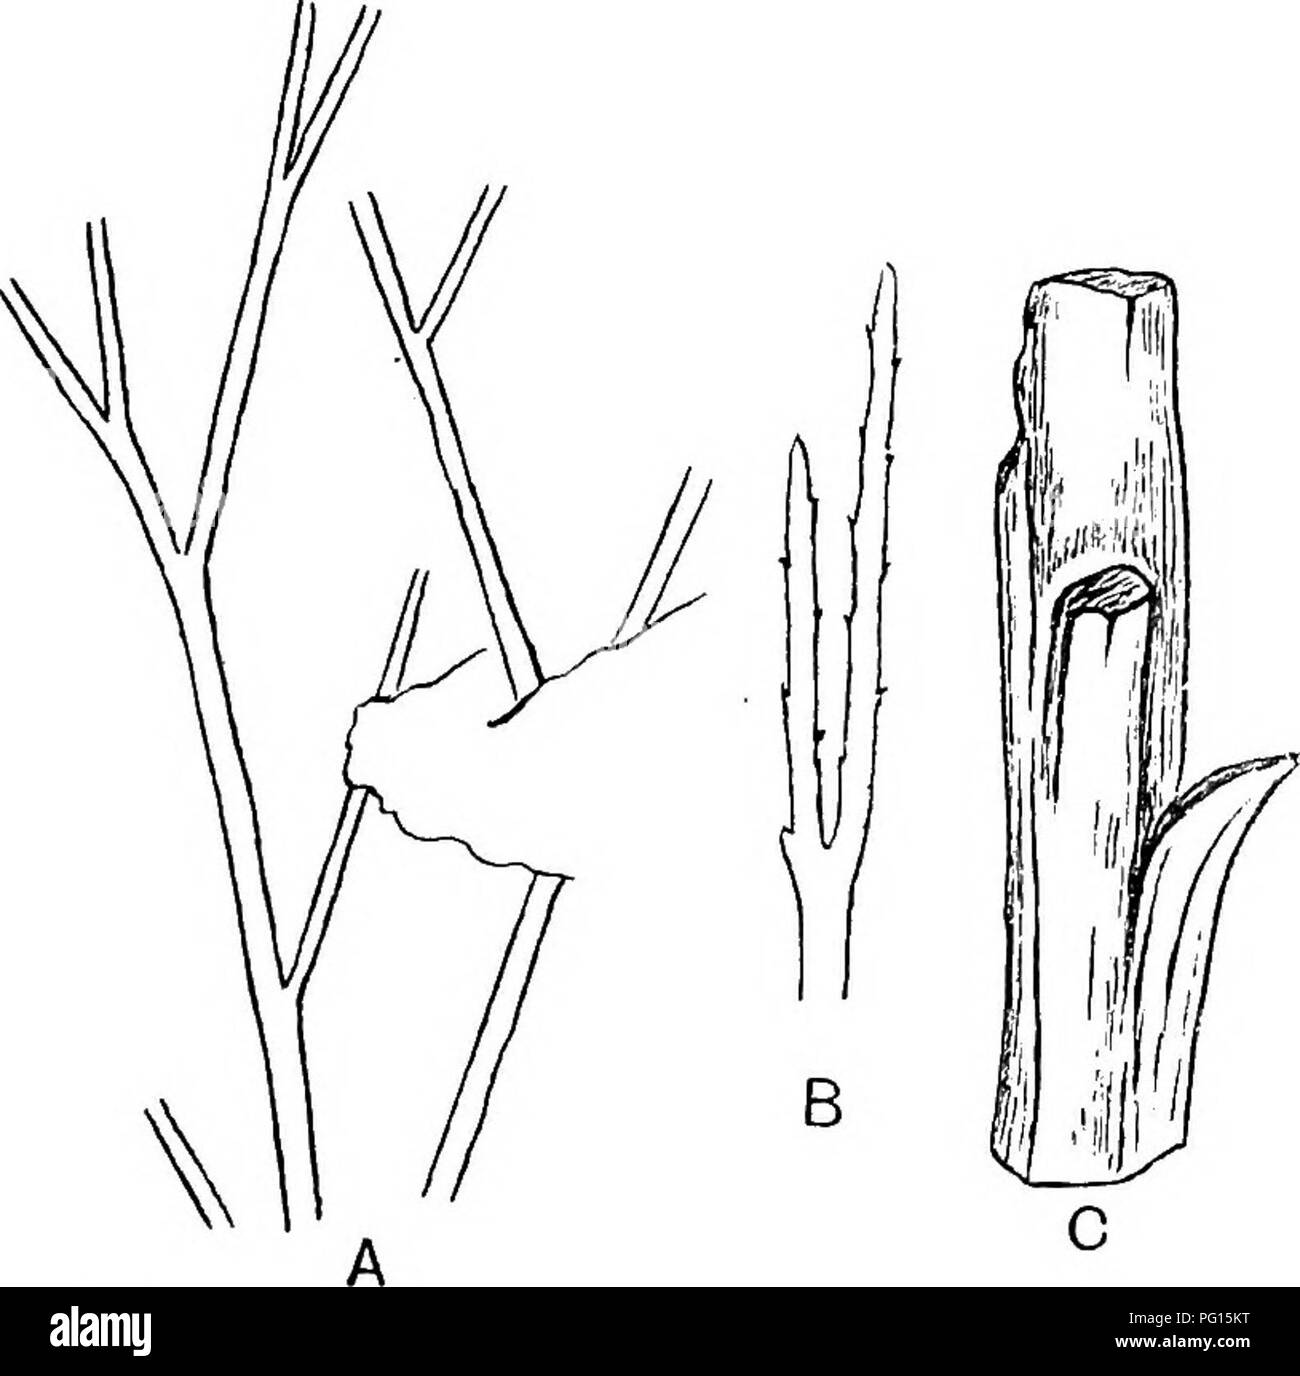 . Fossil plants : for students of botany and geology . Paleobotany. L] earitania; schizolepis 439 imperfectly preserved cone was found on a peduncle having leaves similar to those on the vegetative twigs. Some fragmentary lignitic branches (fig. 807, C) associated with the impressions showed the anatomical characters of a Conifer; but HoUick and Jeffrey, though beheving that the fragments 'almost certainly'. Fig. 807. A, B, Raritania gracilis; C, Baritania'!. (After HoUiok and Jeffrey. A, B, x6; C, X 10.) belong to Raritania, admit that there is no proof of their identity with the dichotomousl Stock Photo